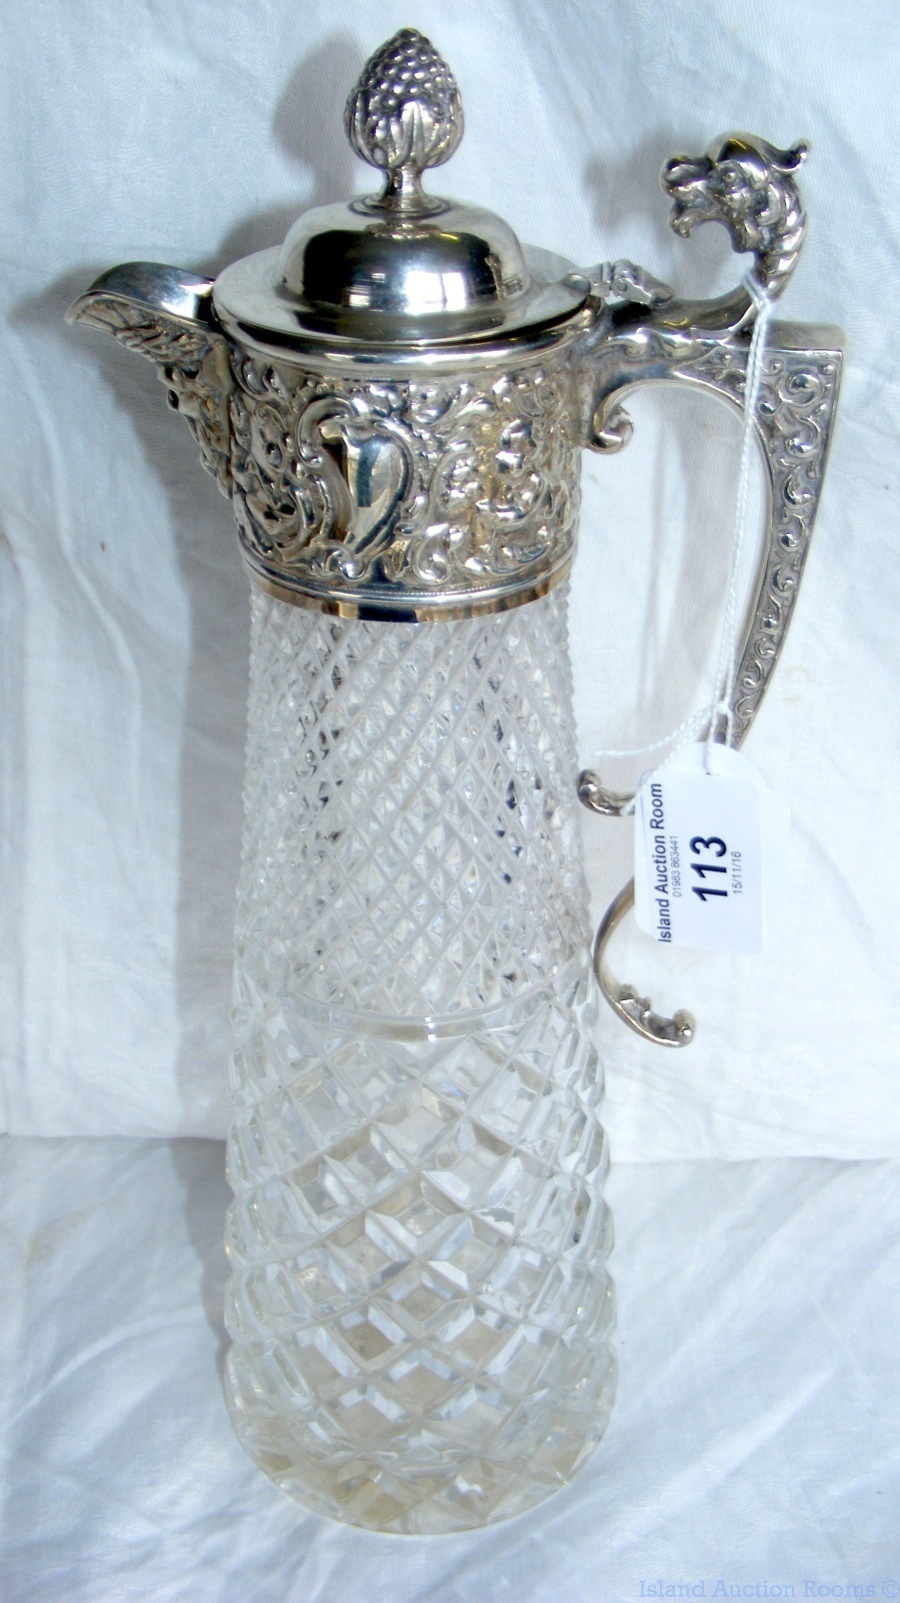 Silver mounted cut glass claret jug, having stylized Dragon to the handle - 30cm high